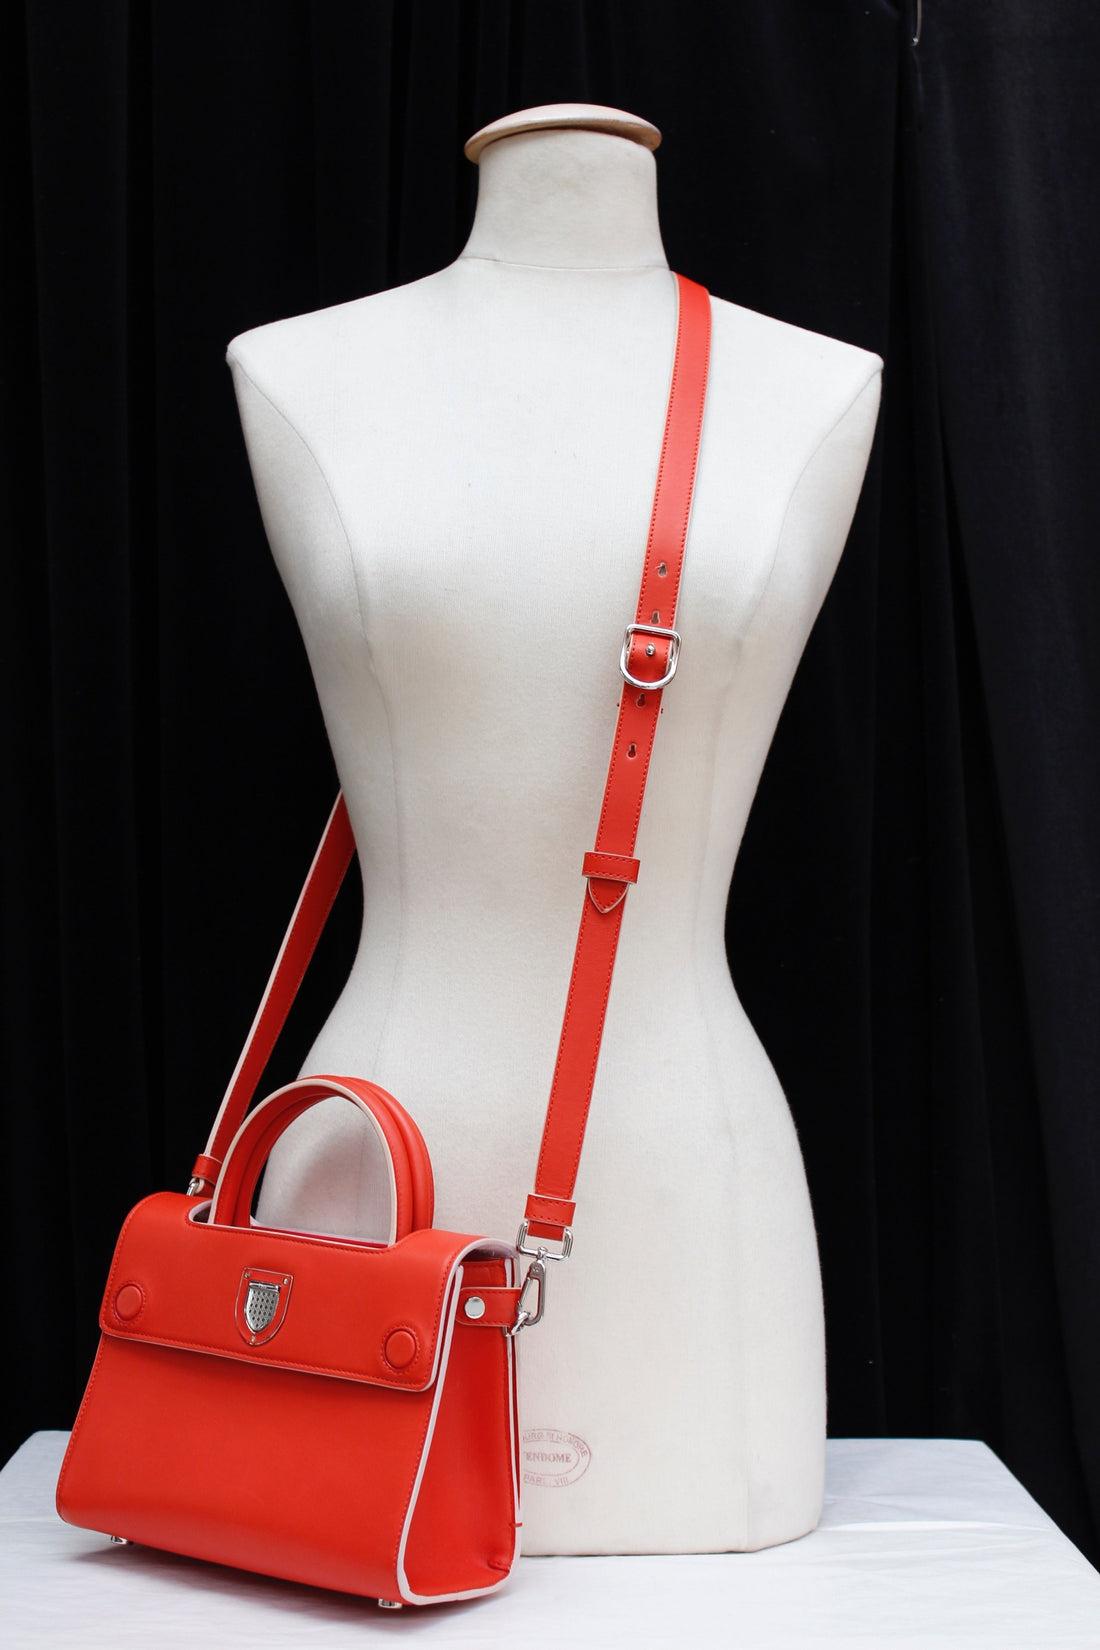 Dior Modern Leather Bag in Orange and White Leather 10